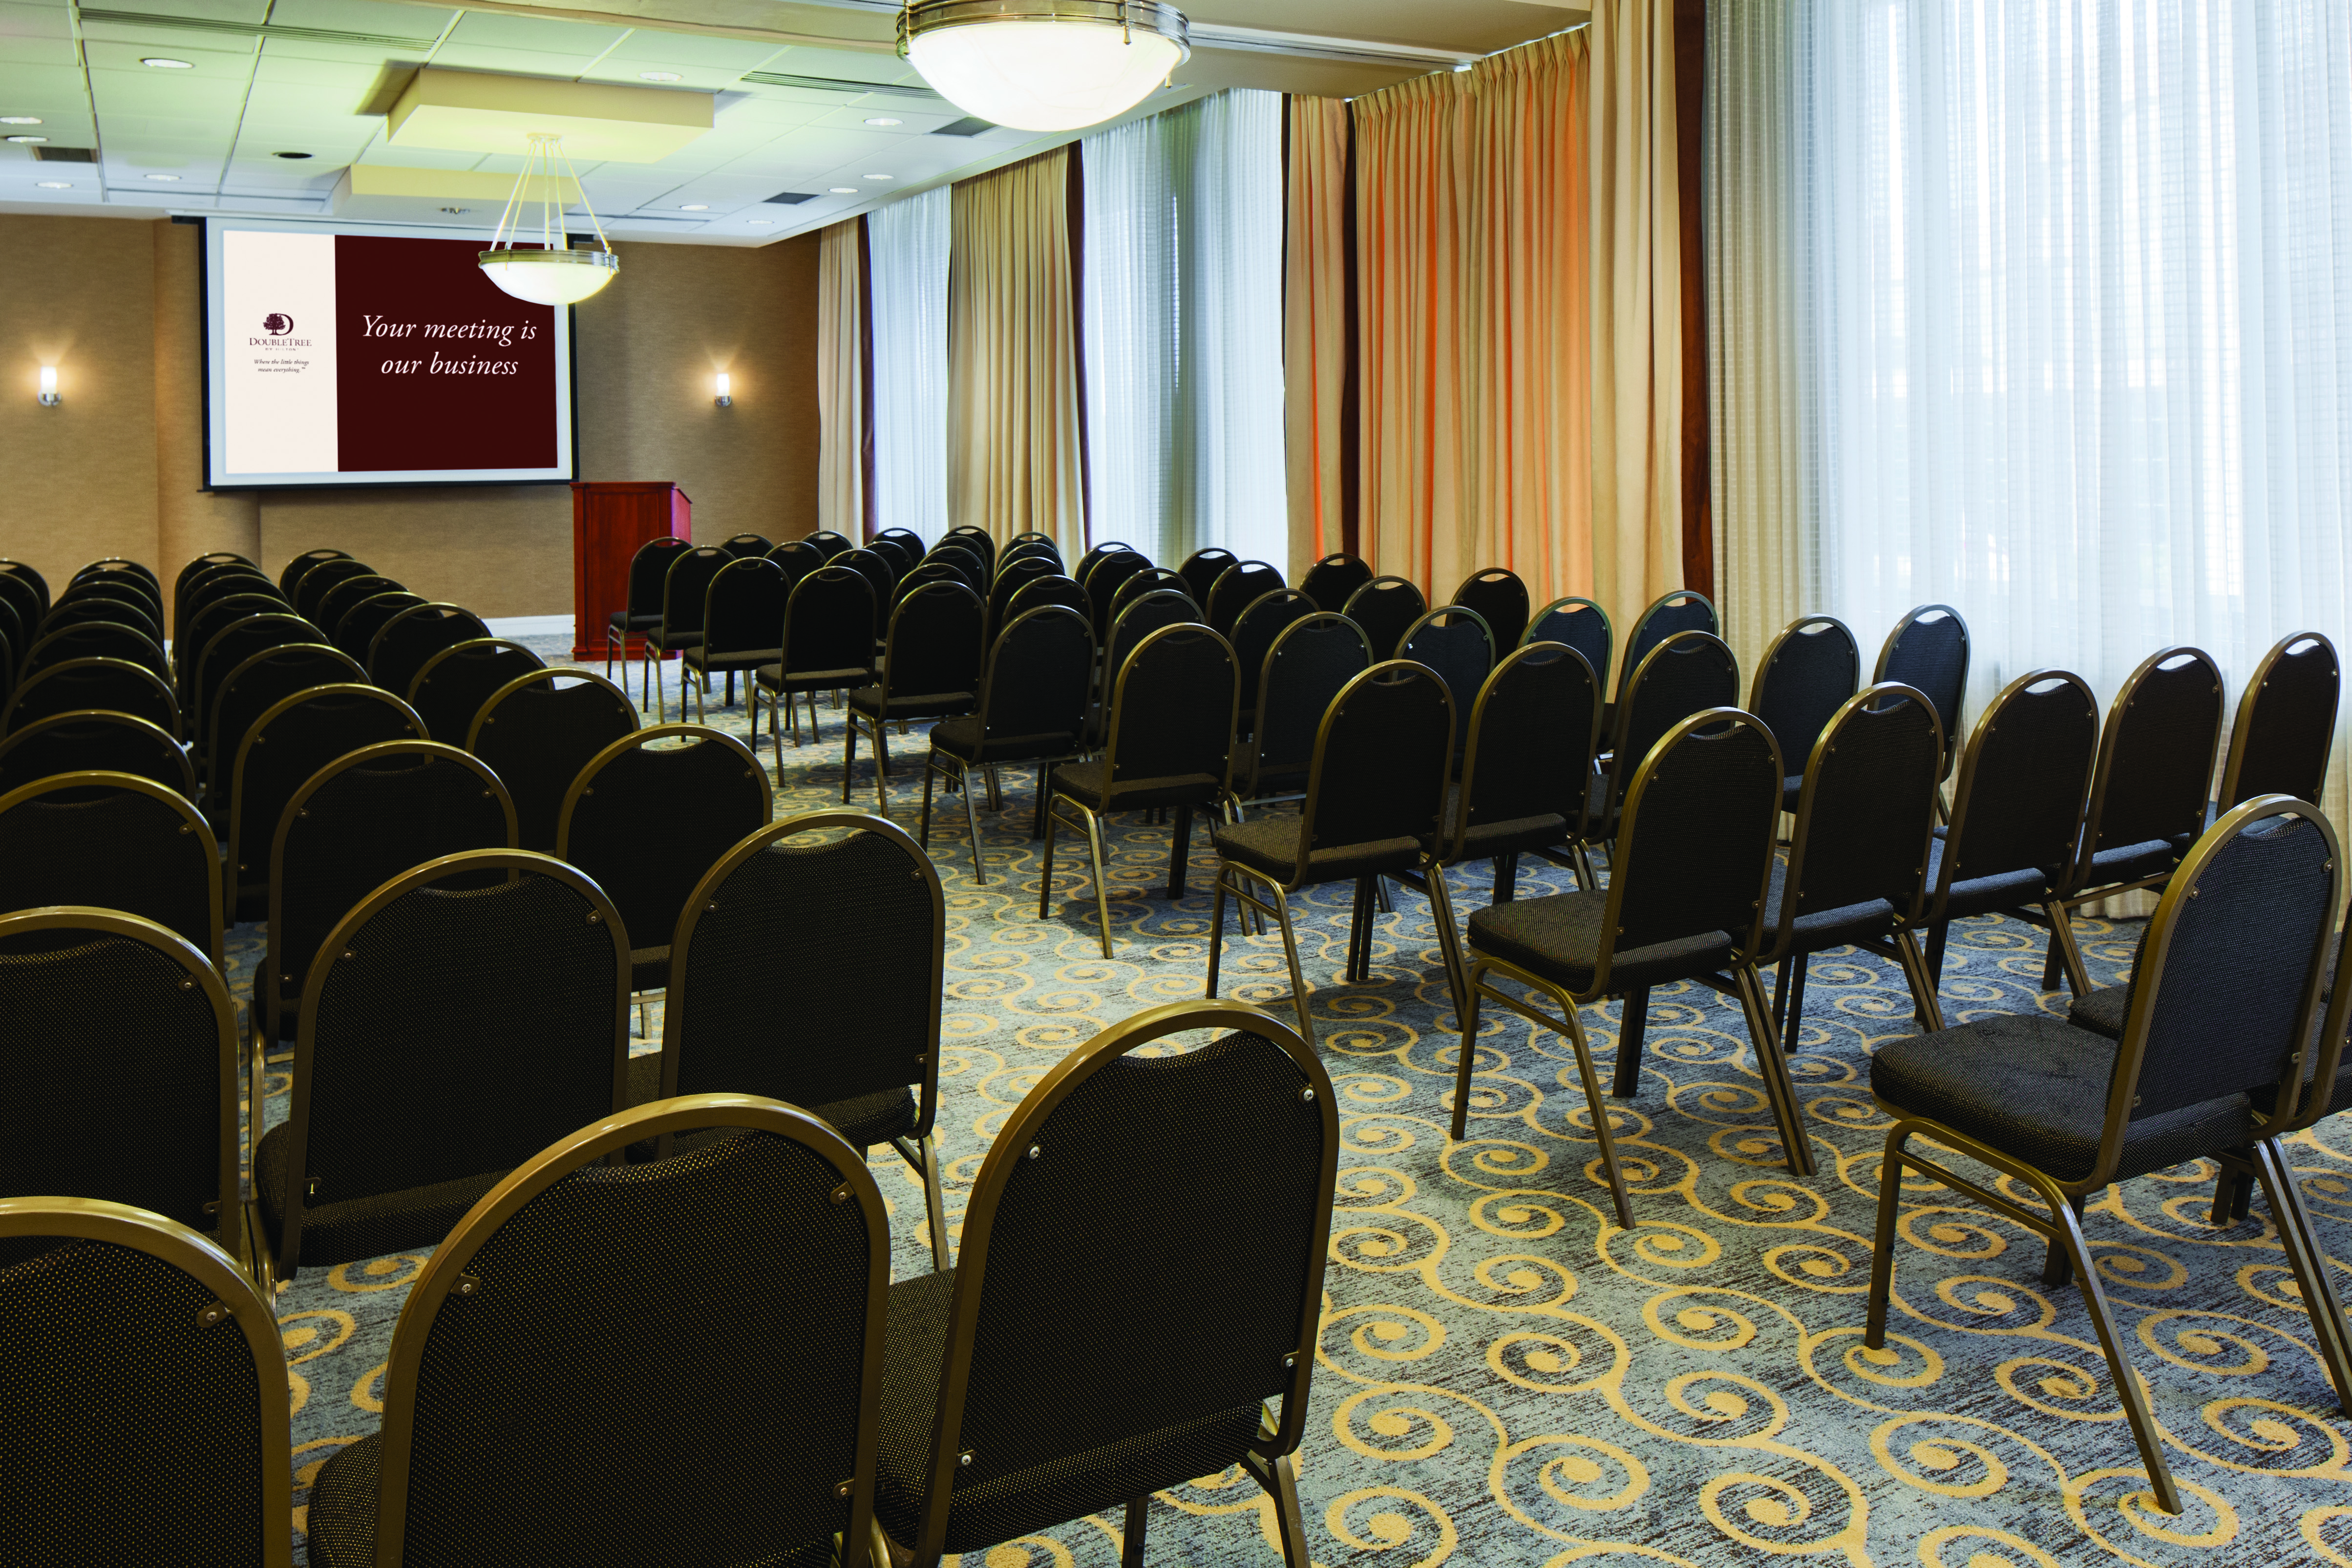 DoubleTree Hotel Meeting Room with Chairs and Projector Screen